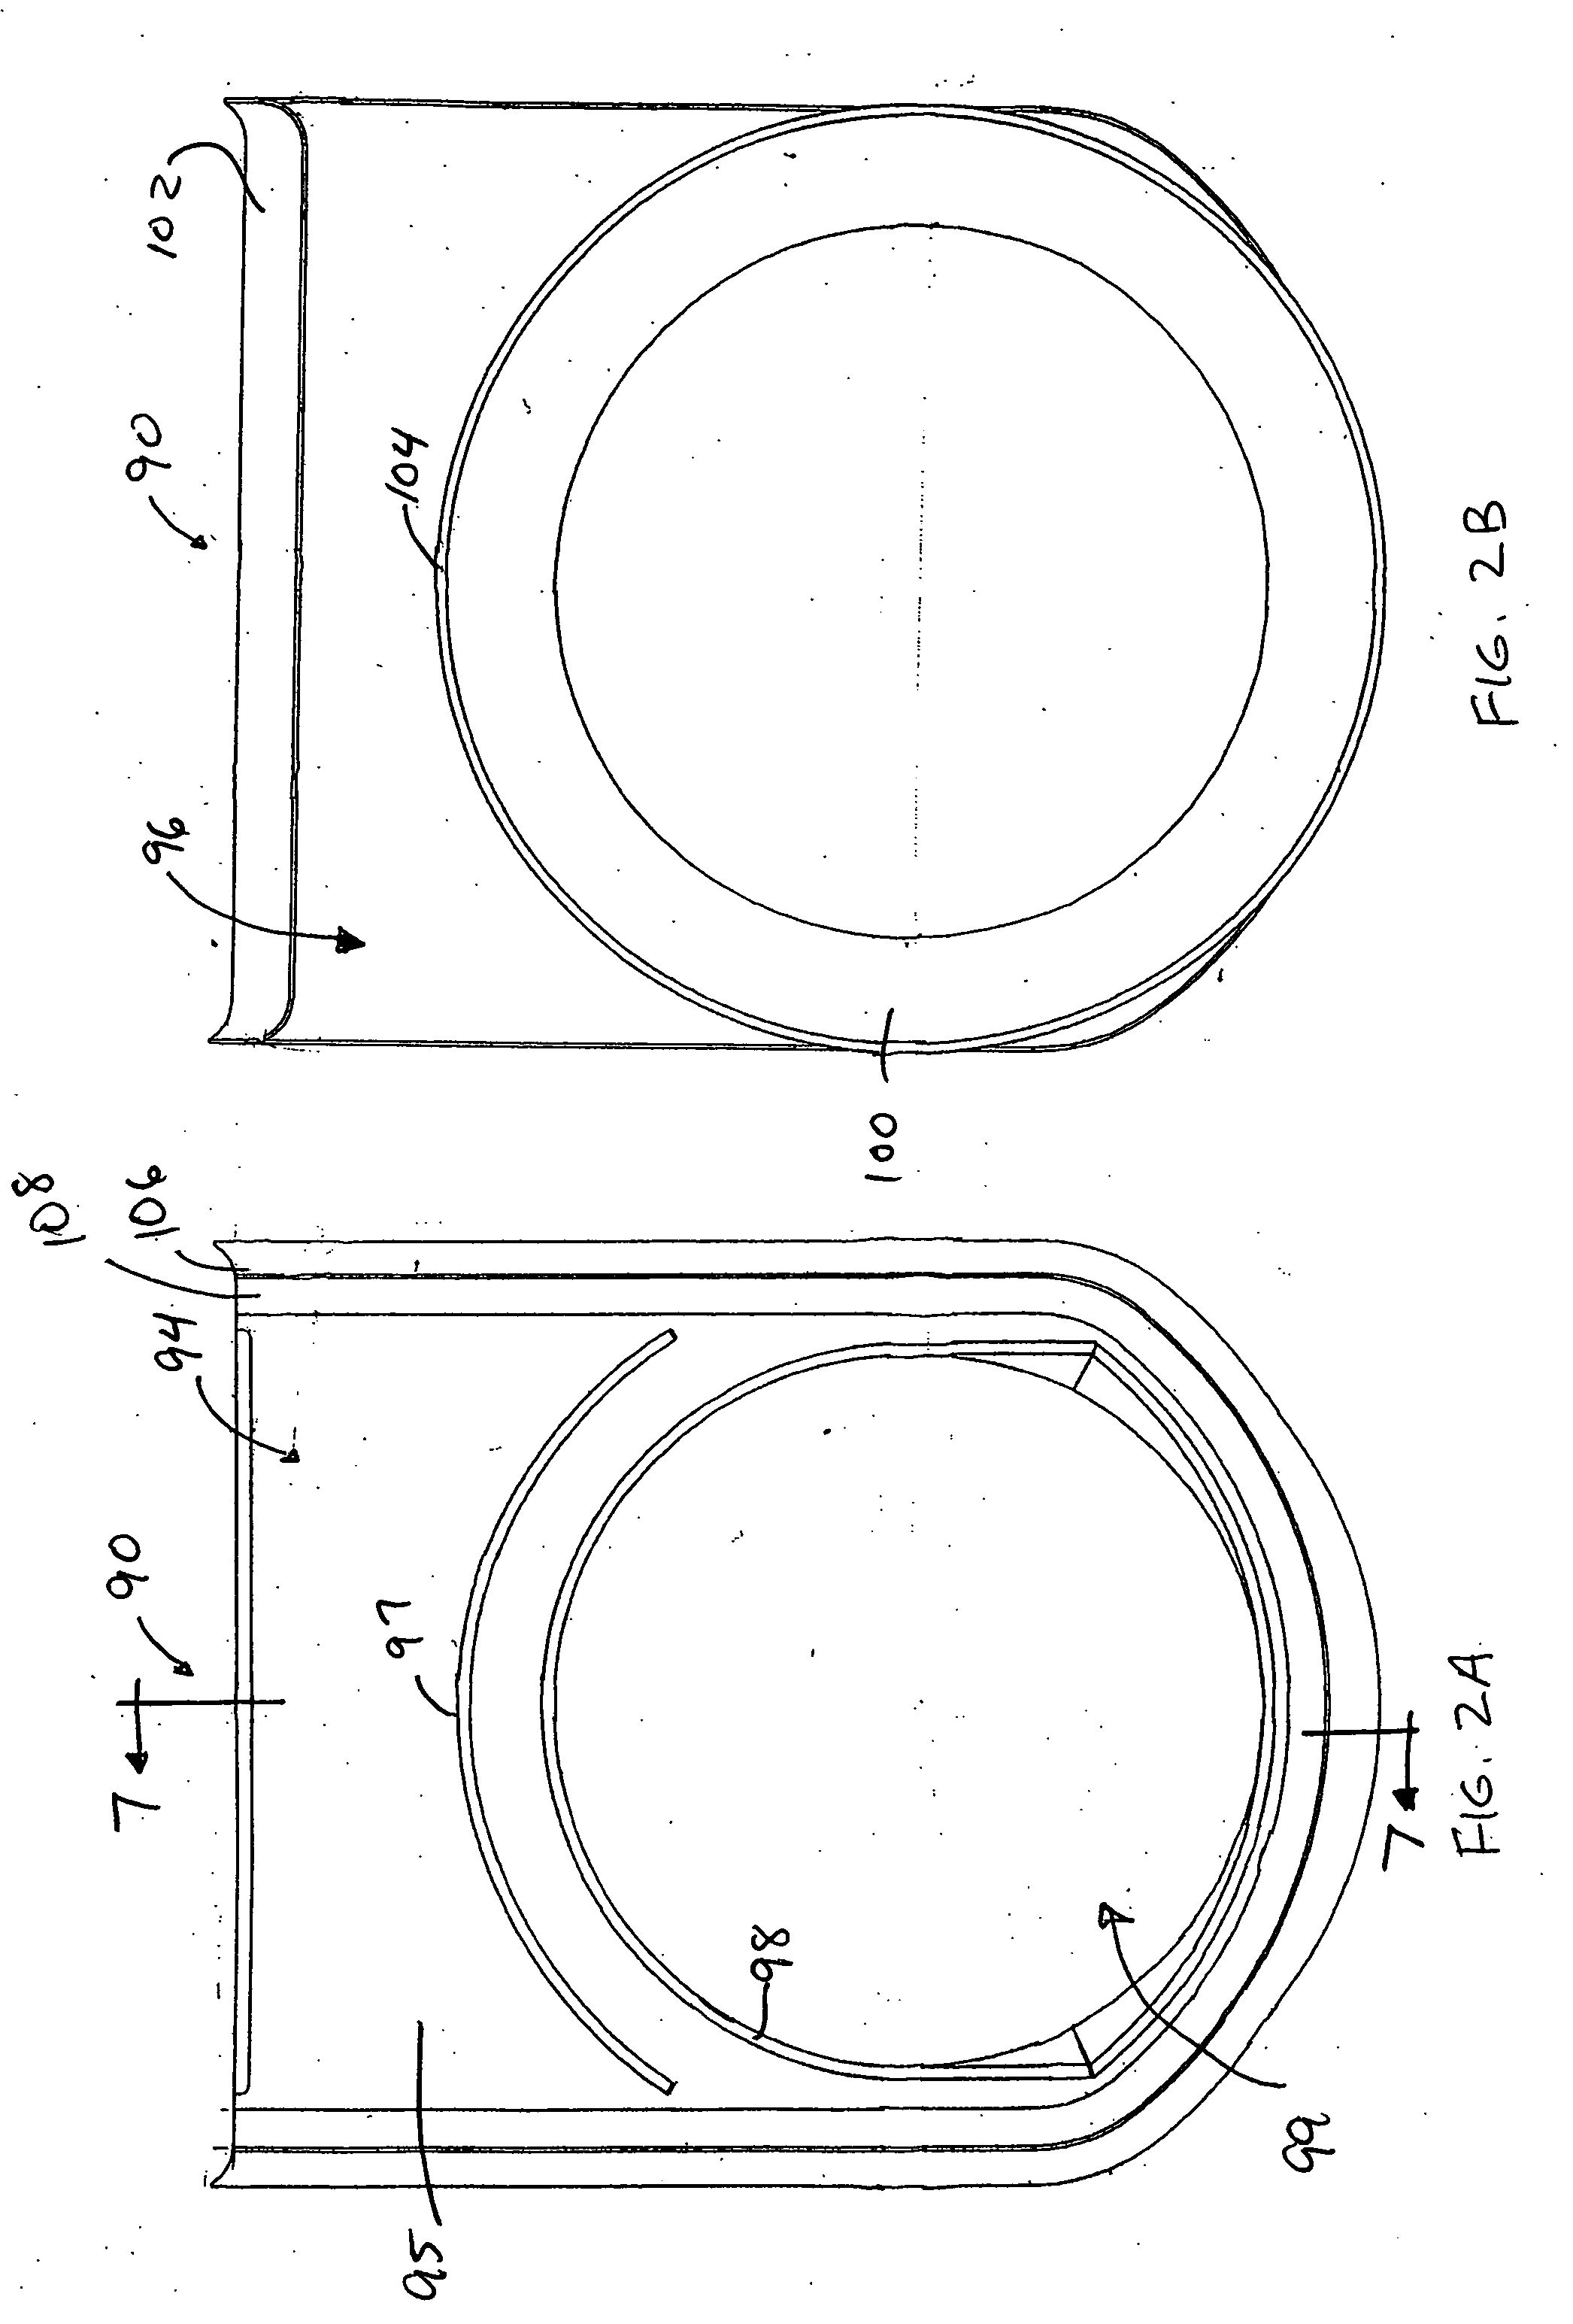 Knife gate valve with multi-piece elastomer liner and/or o-rings at flange interface